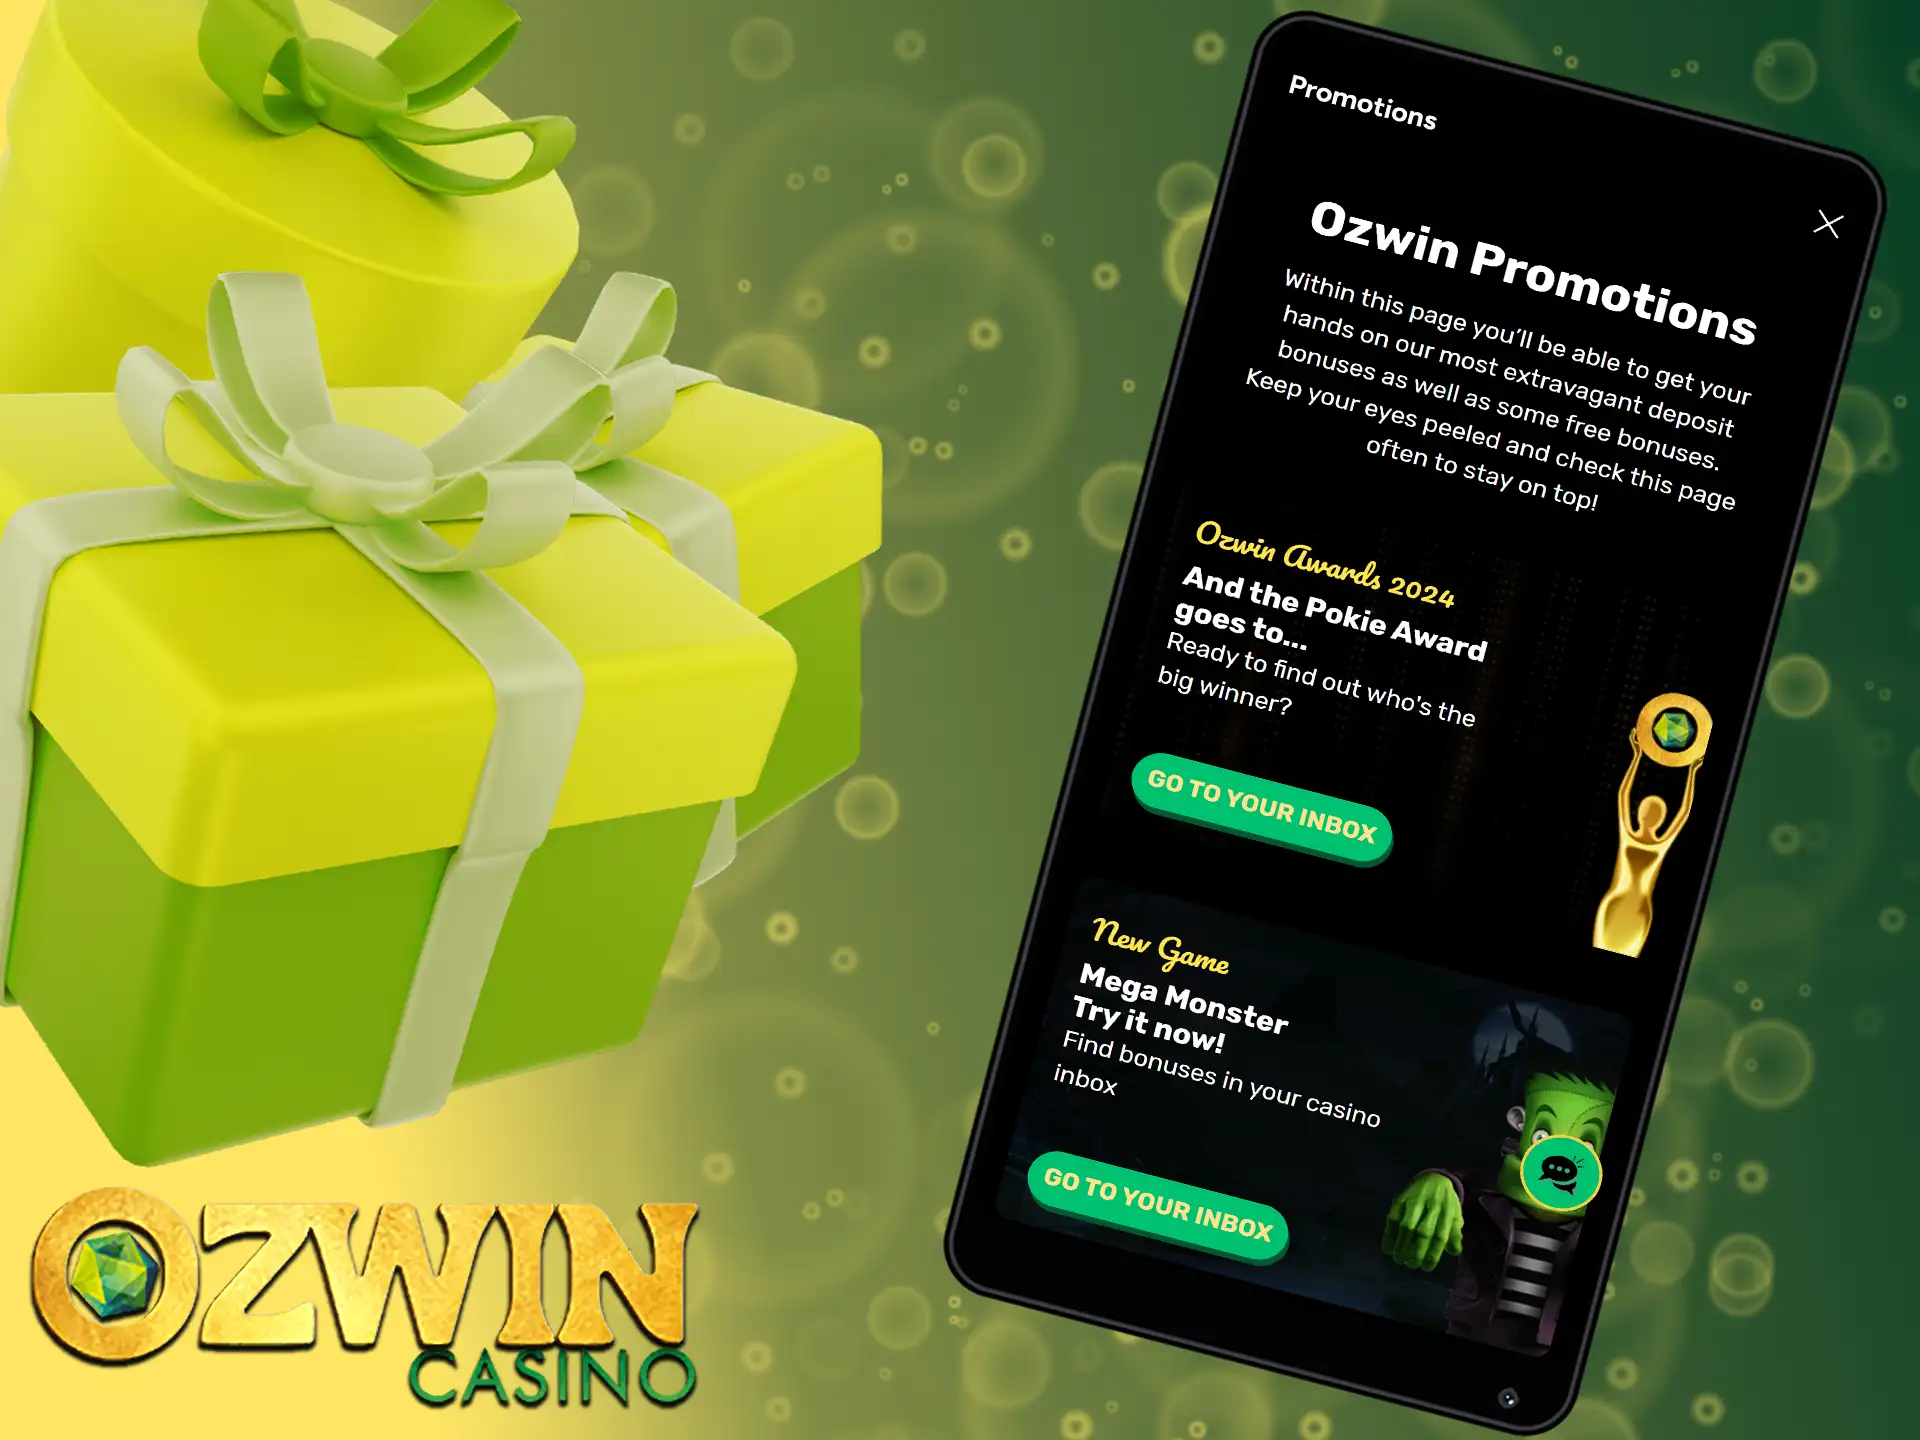 Once the sports betting feature is introduced, Ozwin will provide a welcome bonus!